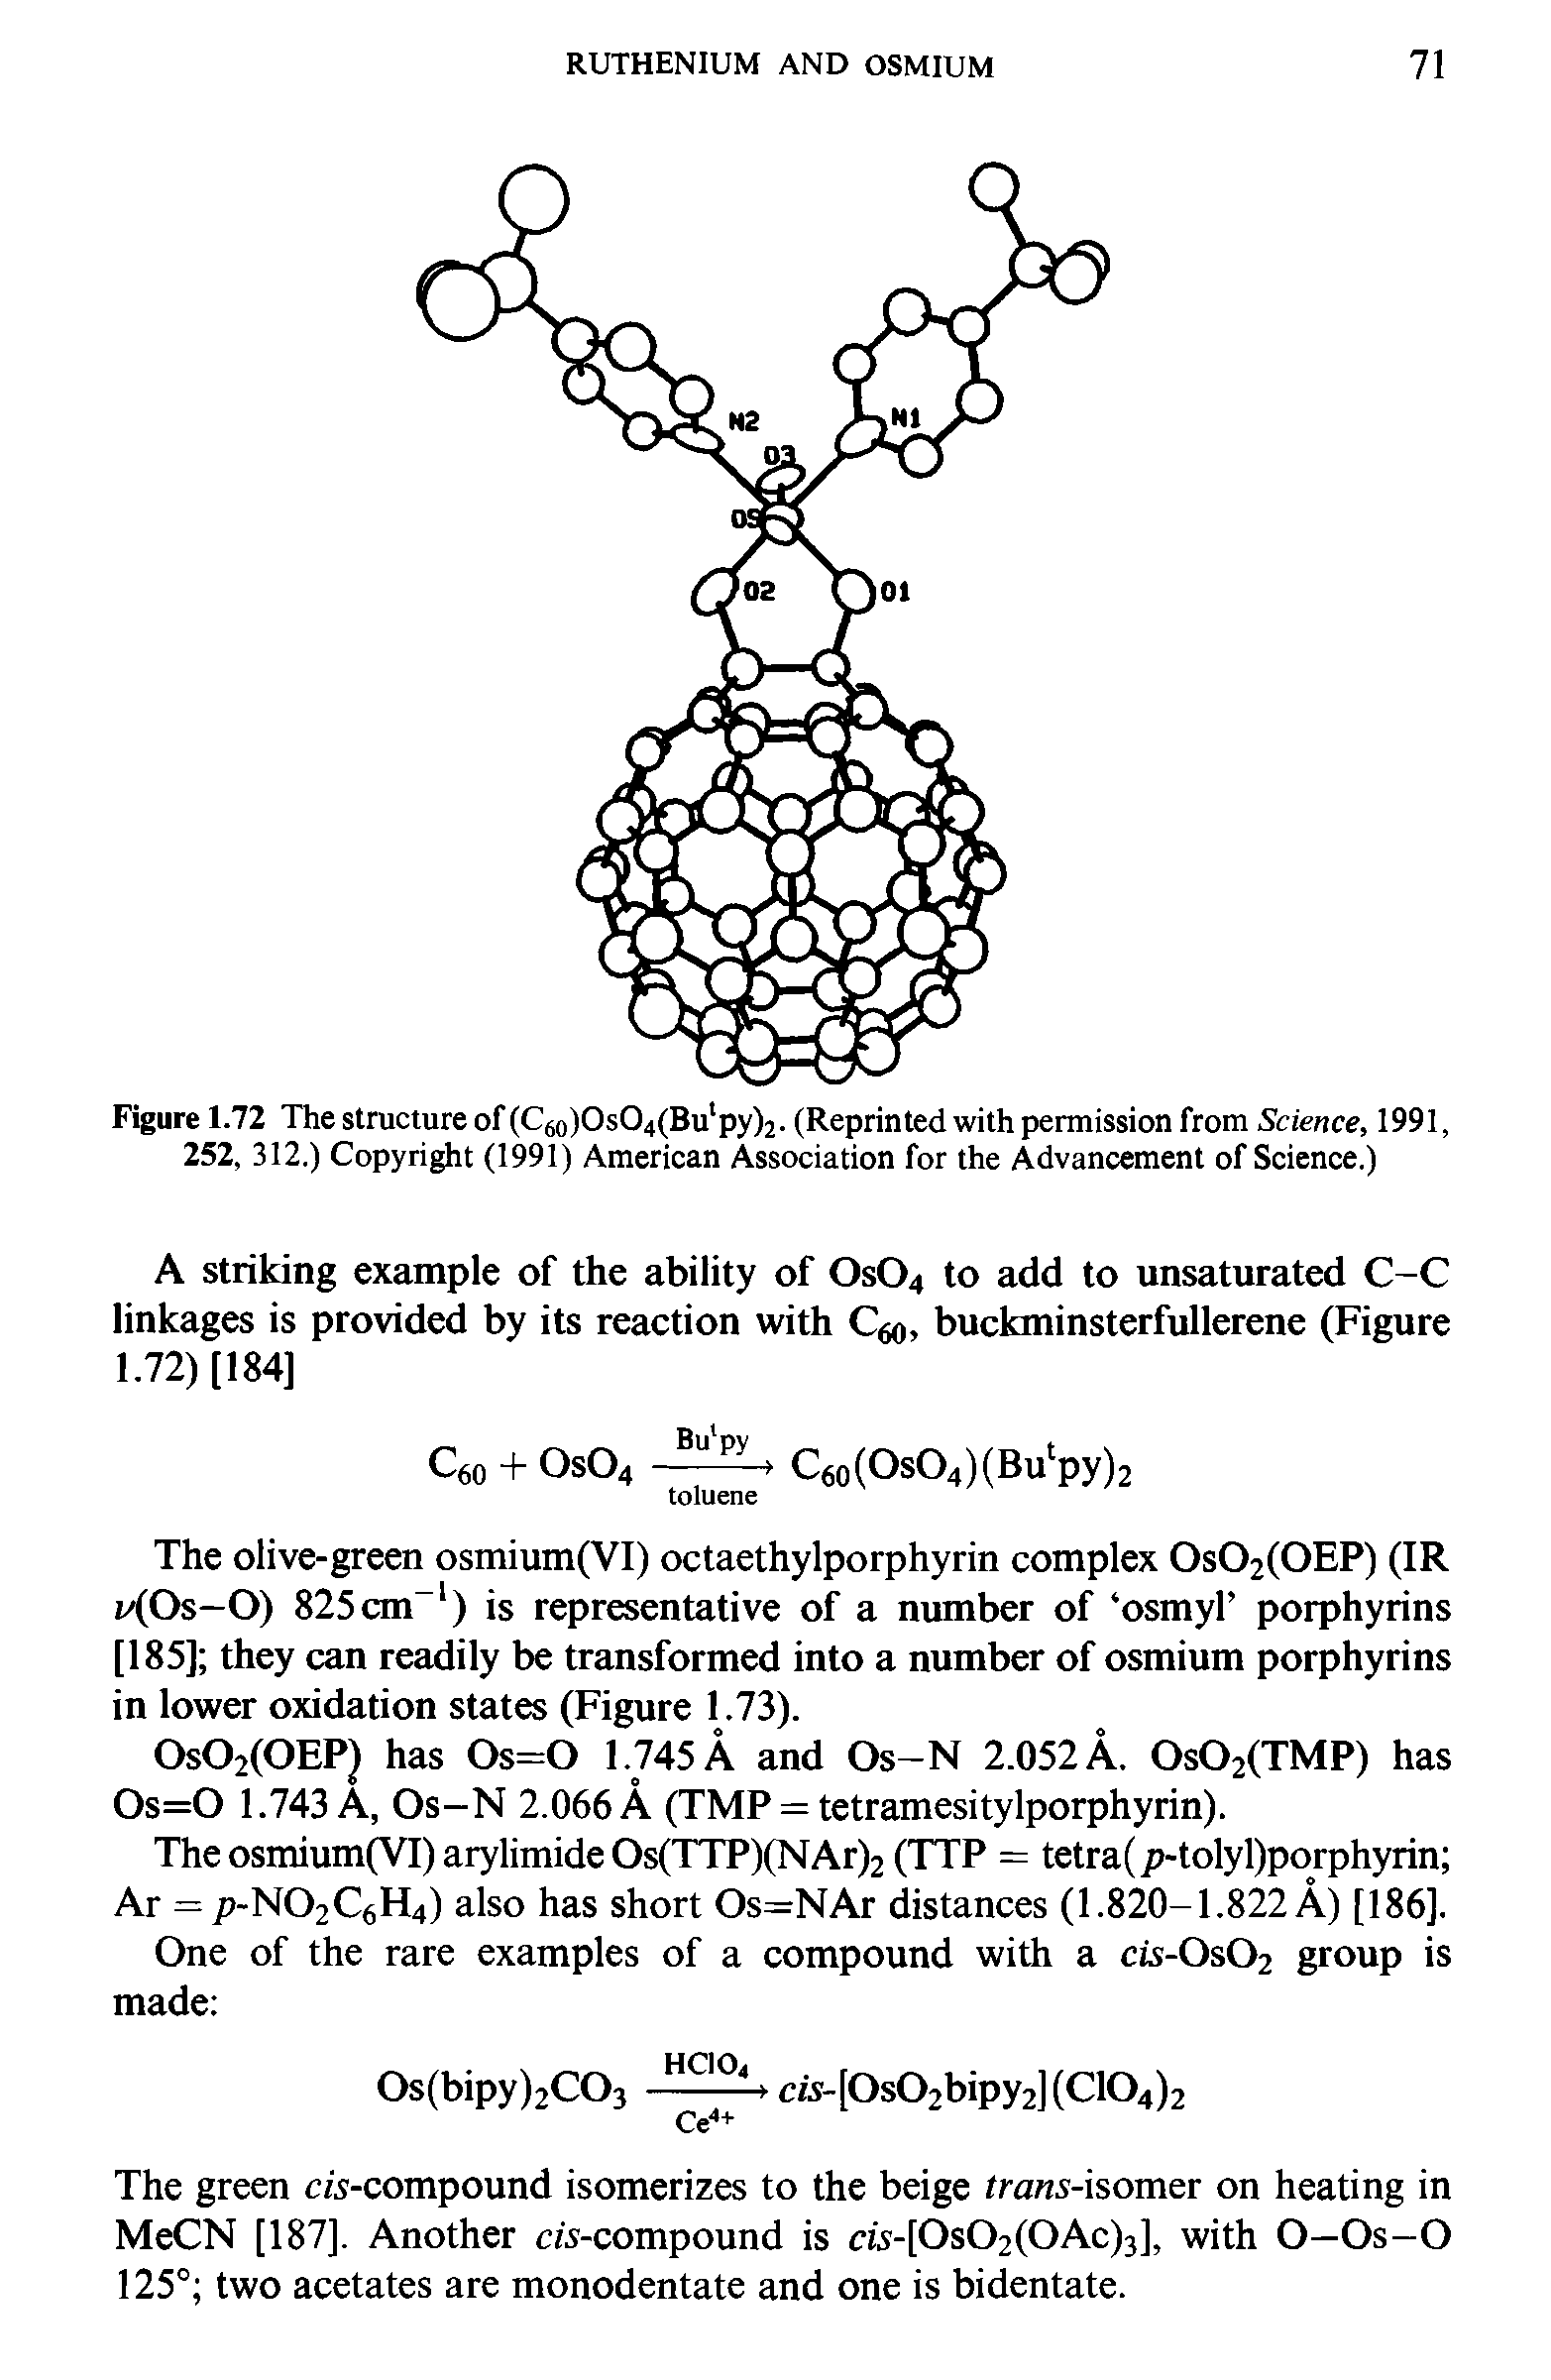 Figure 1.72 The structure of (C60)OsO4(Bu py)2. (Reprinted with permission from Science, 1991, 252, 312.) Copyright (1991) American Association for the Advancement of Science.)...